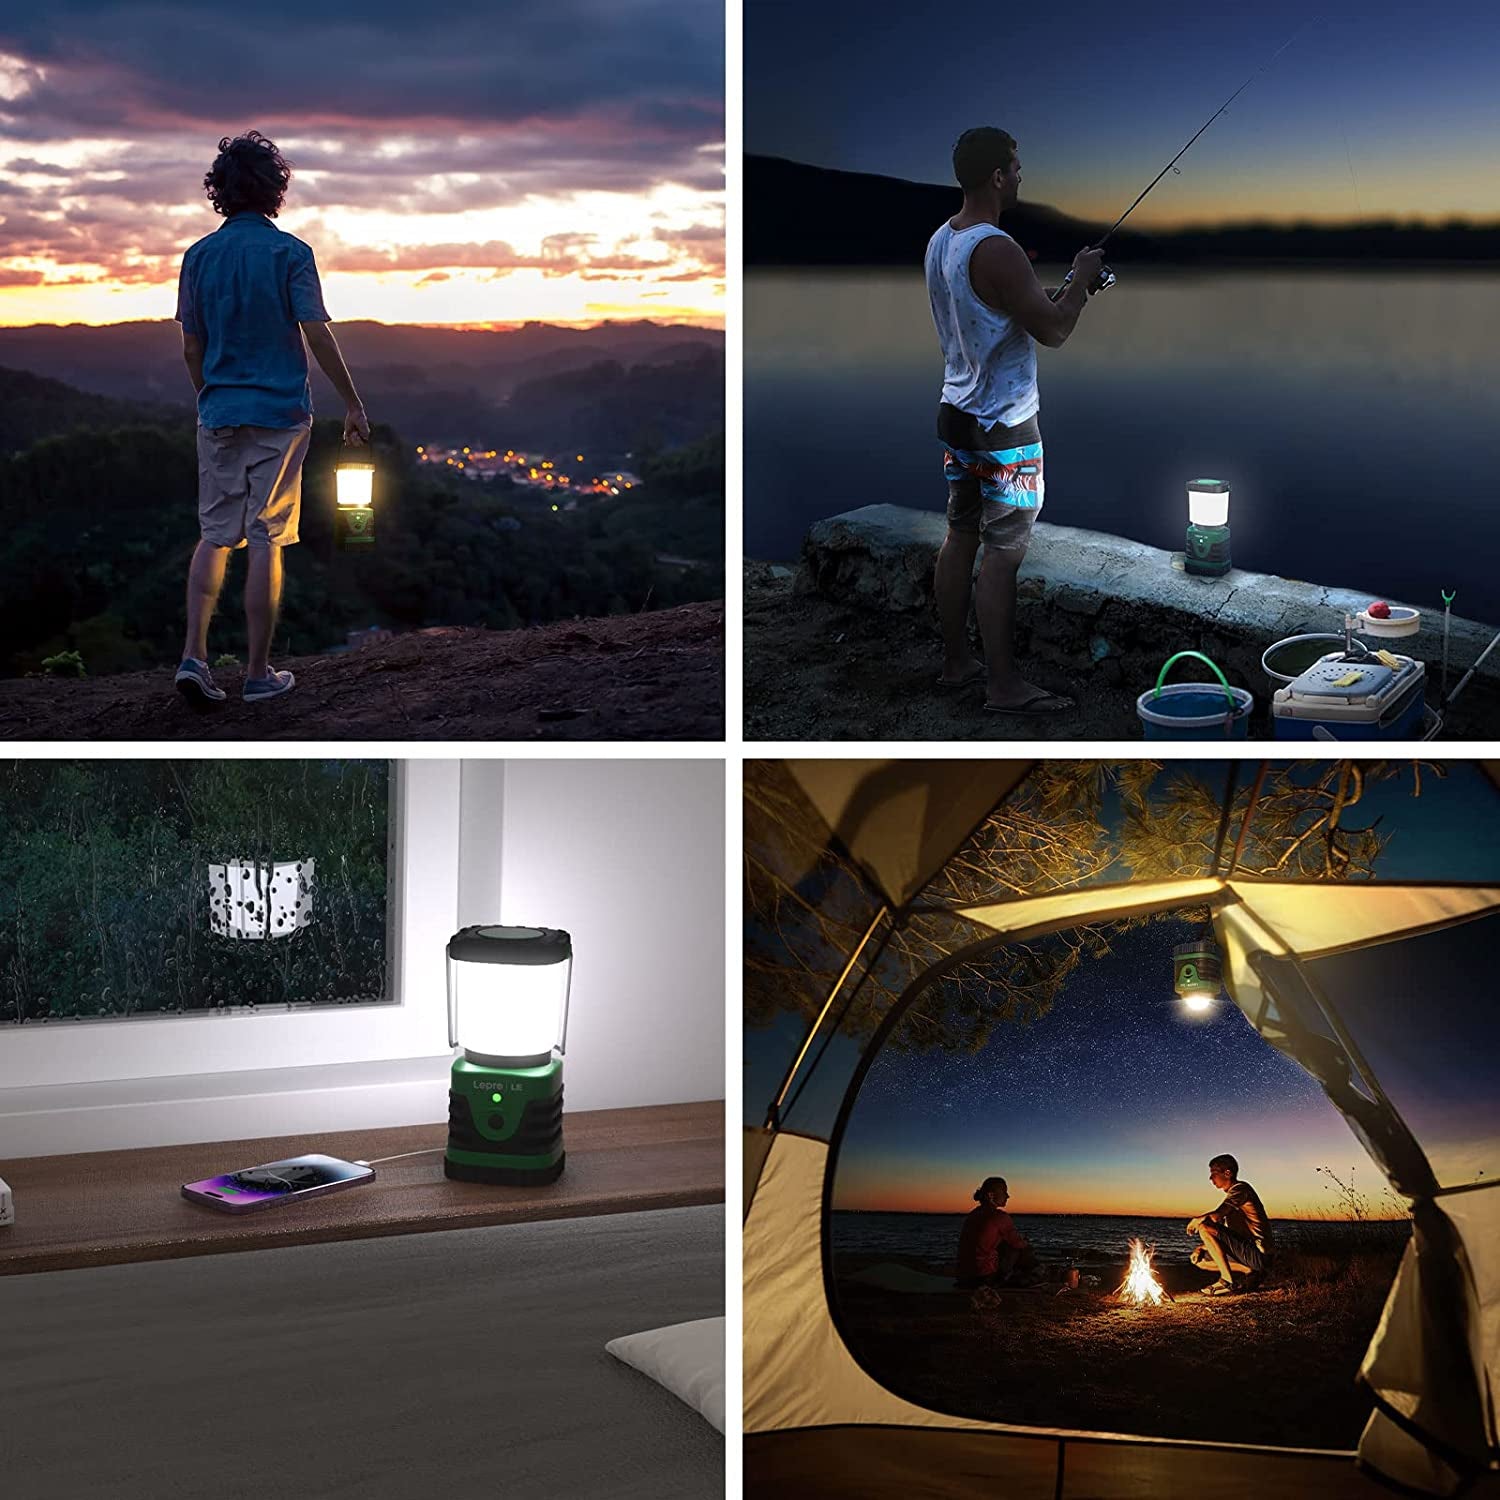 1000LM LED Rechargeable Camping Lantern With 4400Mah Power Bank